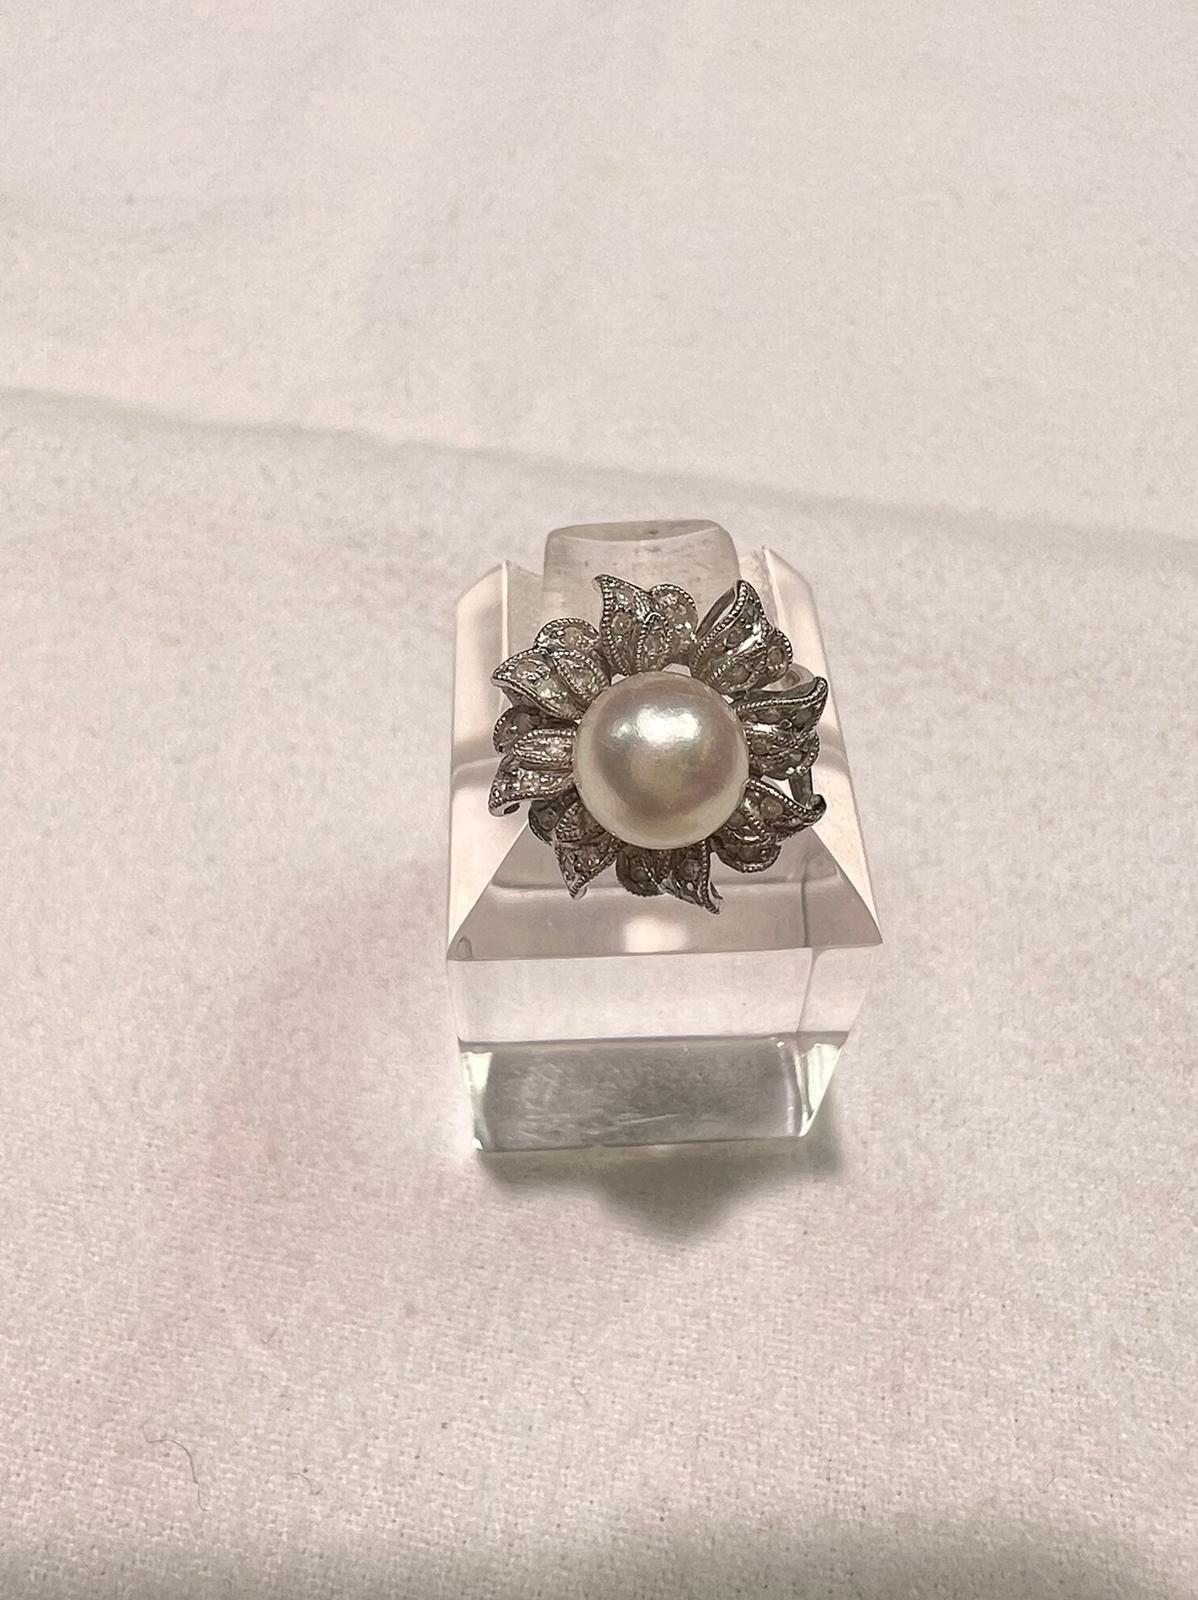 8X8mm Akoya pearl with 14k white gold ring with diamonds
